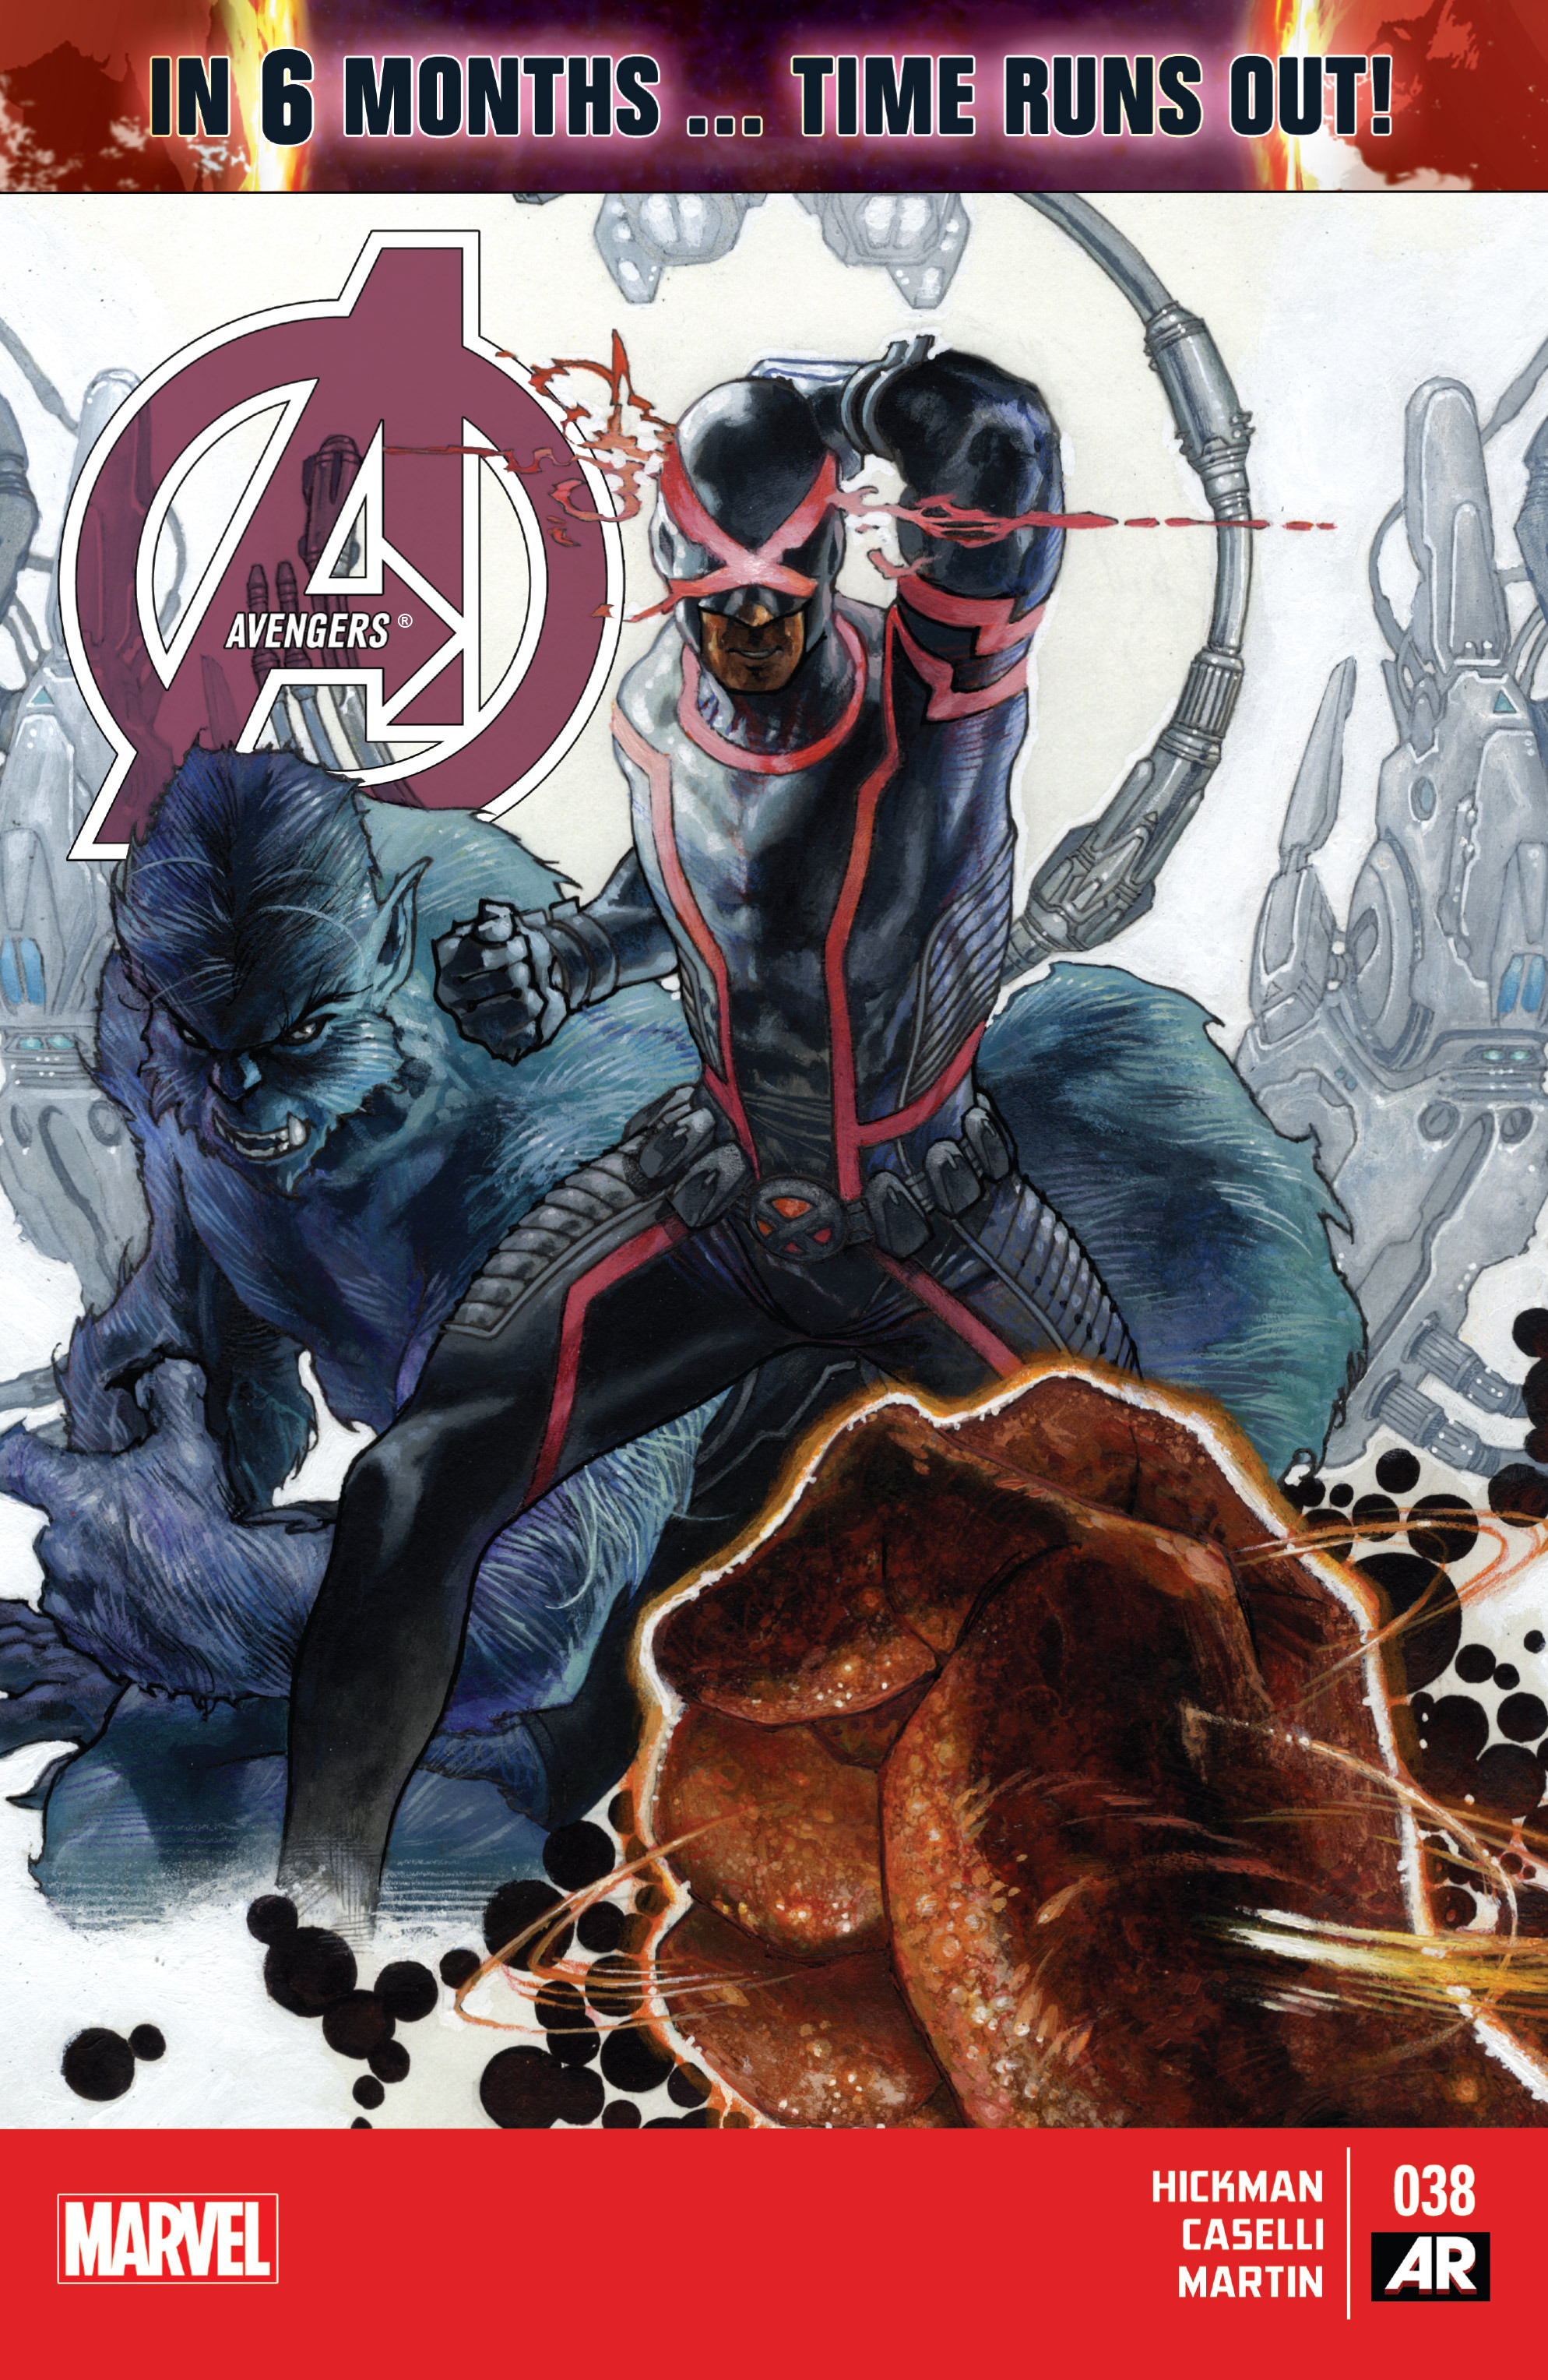 Read online Avengers: Time Runs Out comic -  Issue # TPB 2 - 27